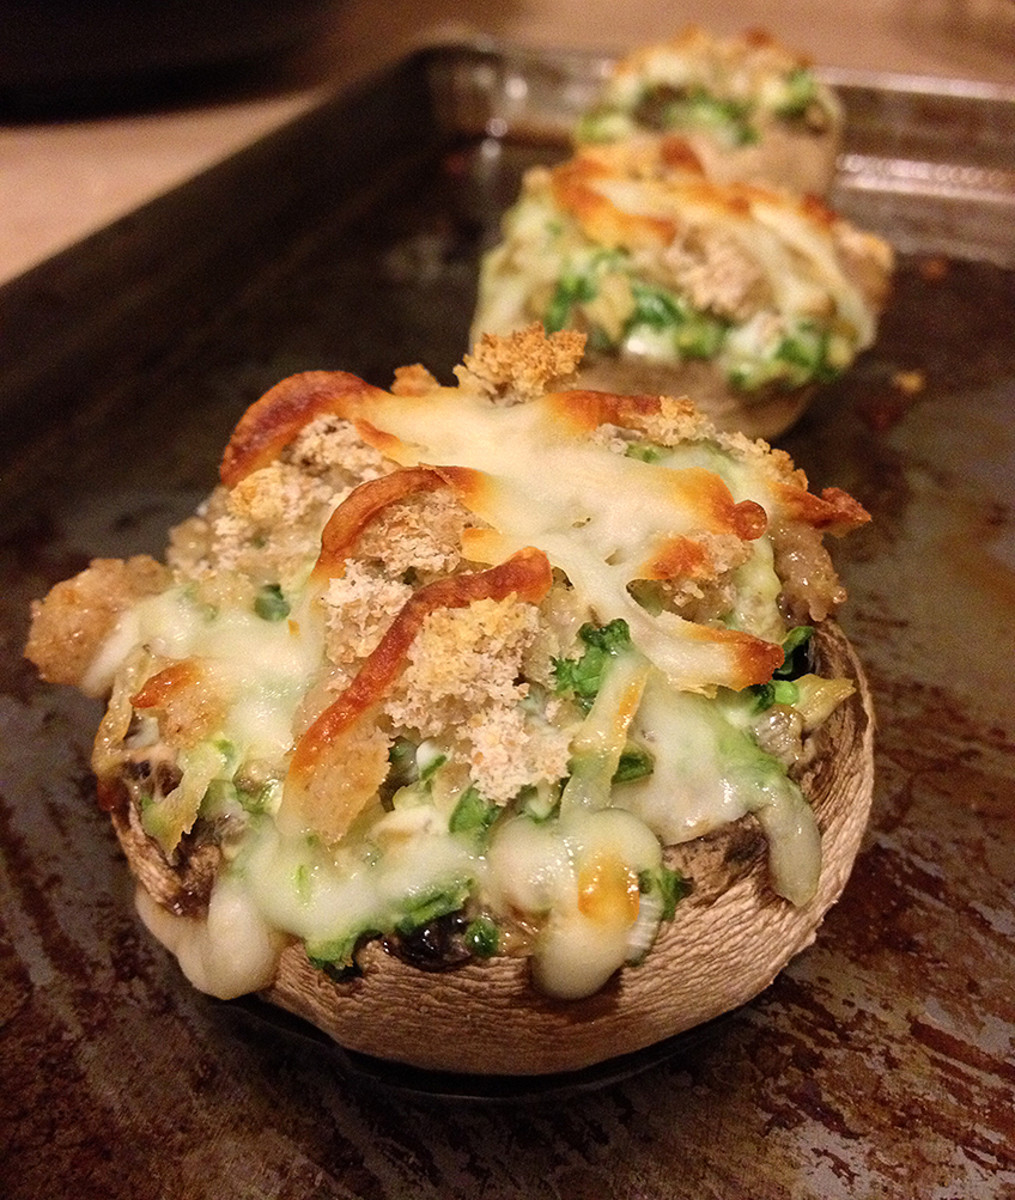 Spinach Stuffed Mushroom Recipe
 Oven Baked Spinach and Cheese Stuffed Mushrooms With